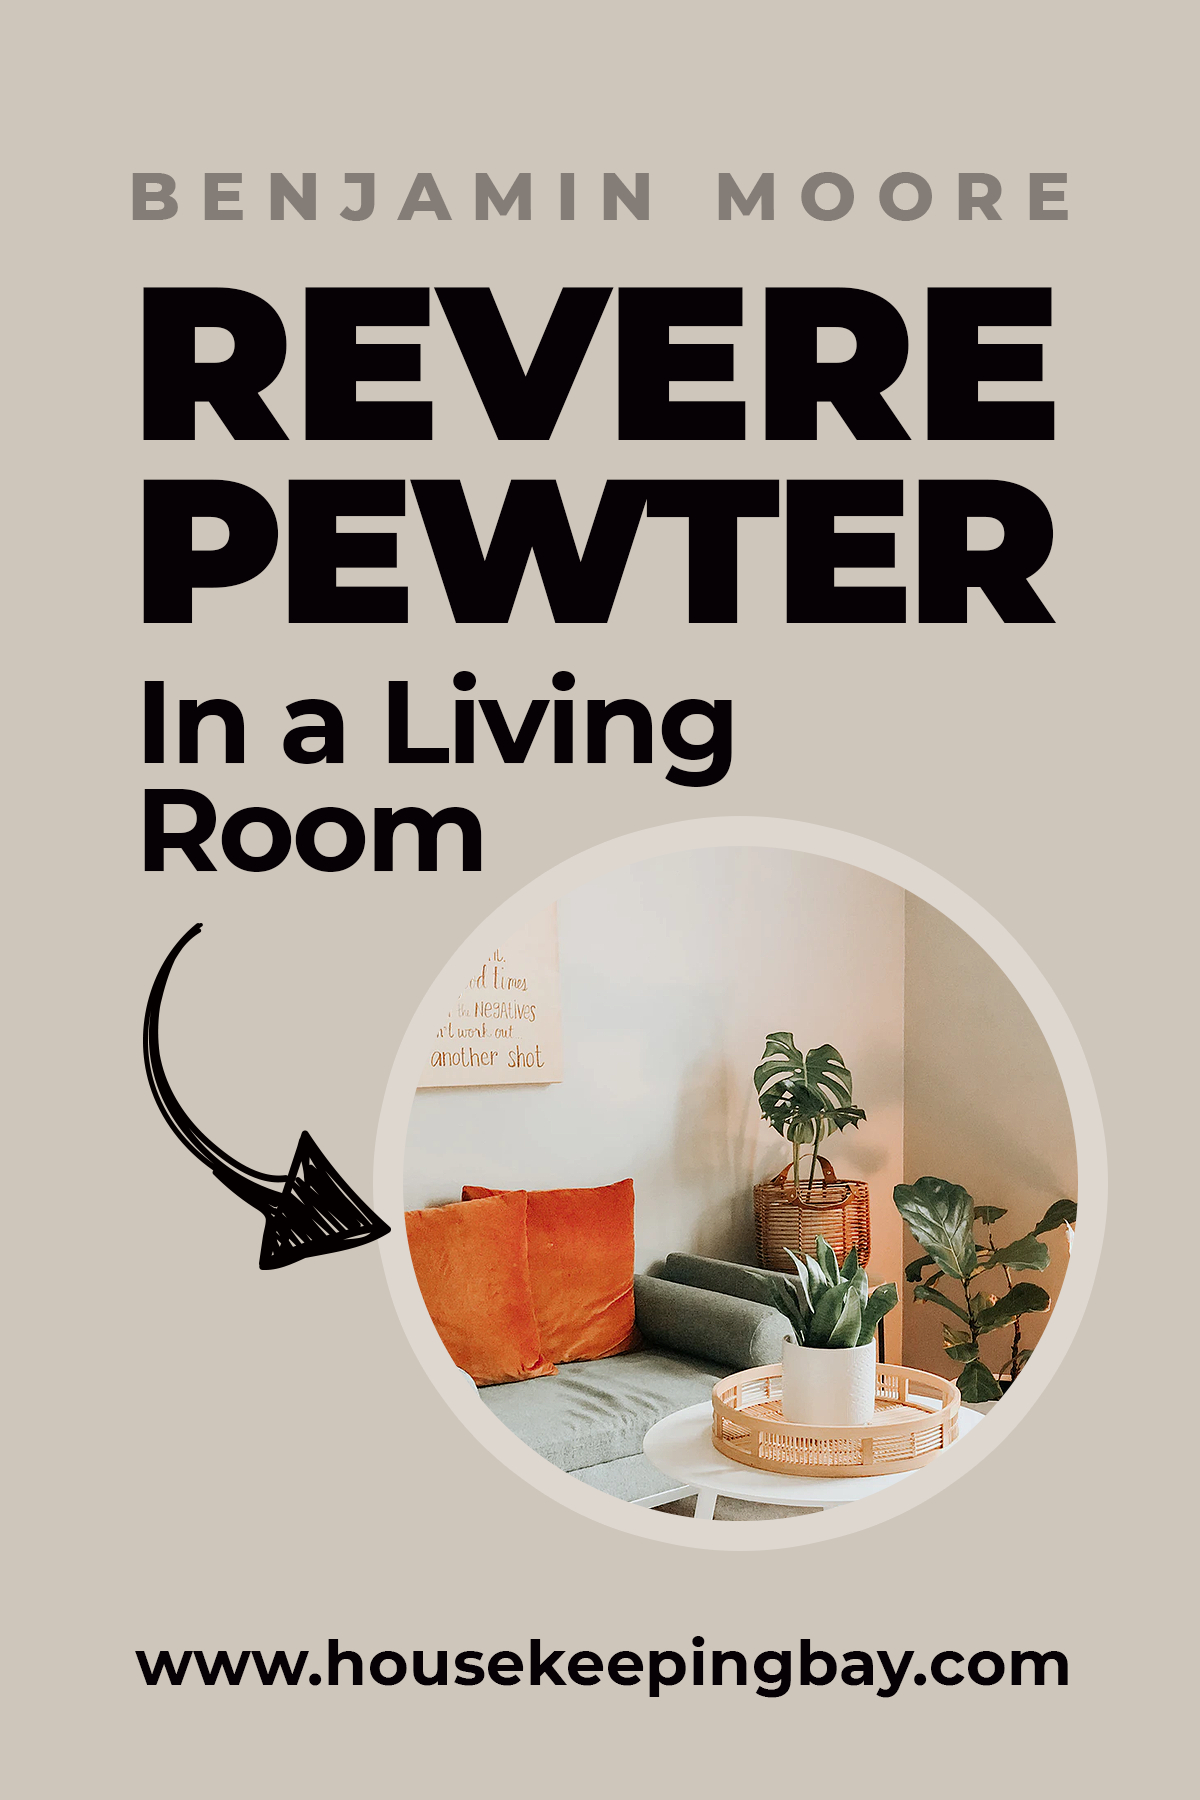 Revere Pewter In a Living Room 2